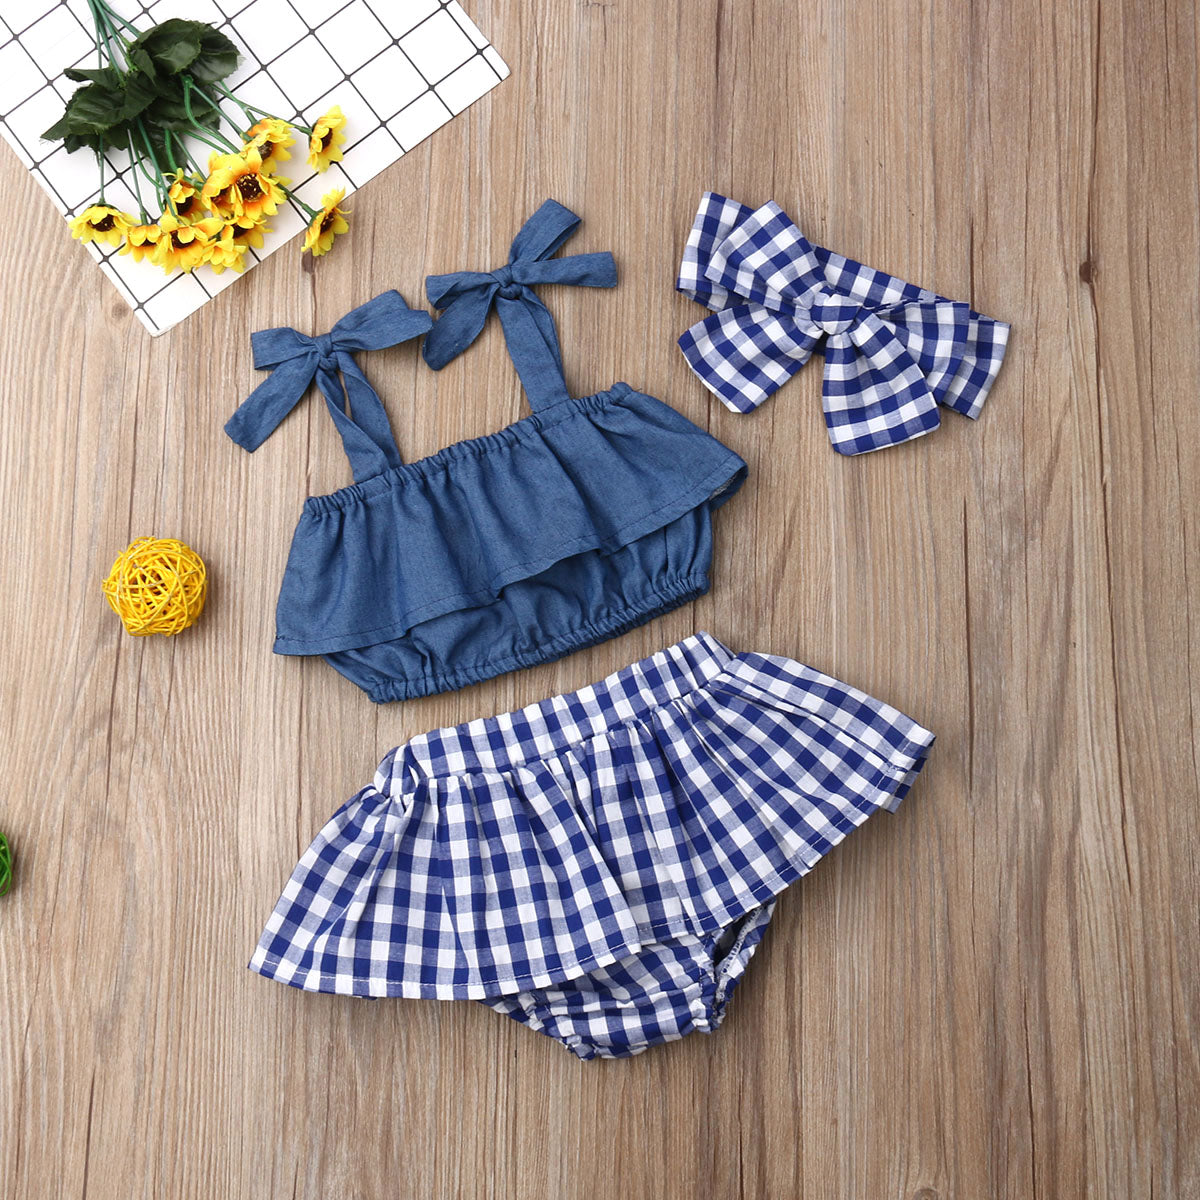 Pudcoco Newest Fashion Summer Newborn Baby Girl Clothes Sling Ruffle